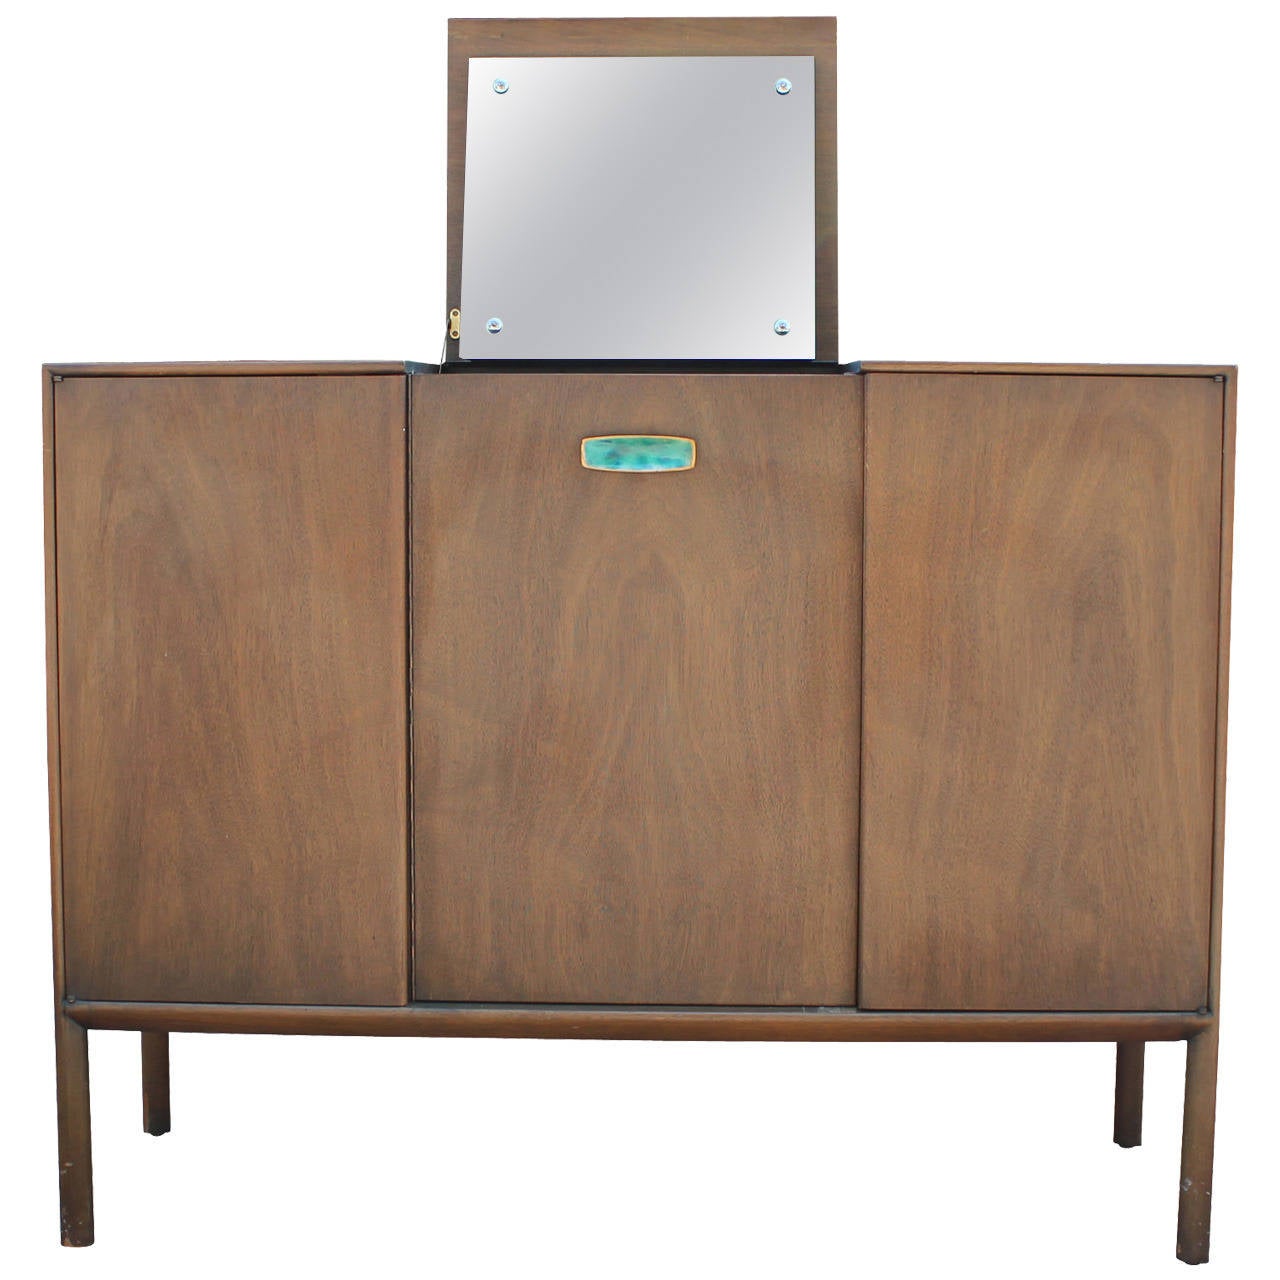 Beautiful and clean lined gentlemen's Chest by Ray Sabota for Mt. Airy.  A single green enamel handle adds visual interest. Center flip top drawer opens to reveal a mirror. Left door opens to four small drawers. Center and right doors open to three